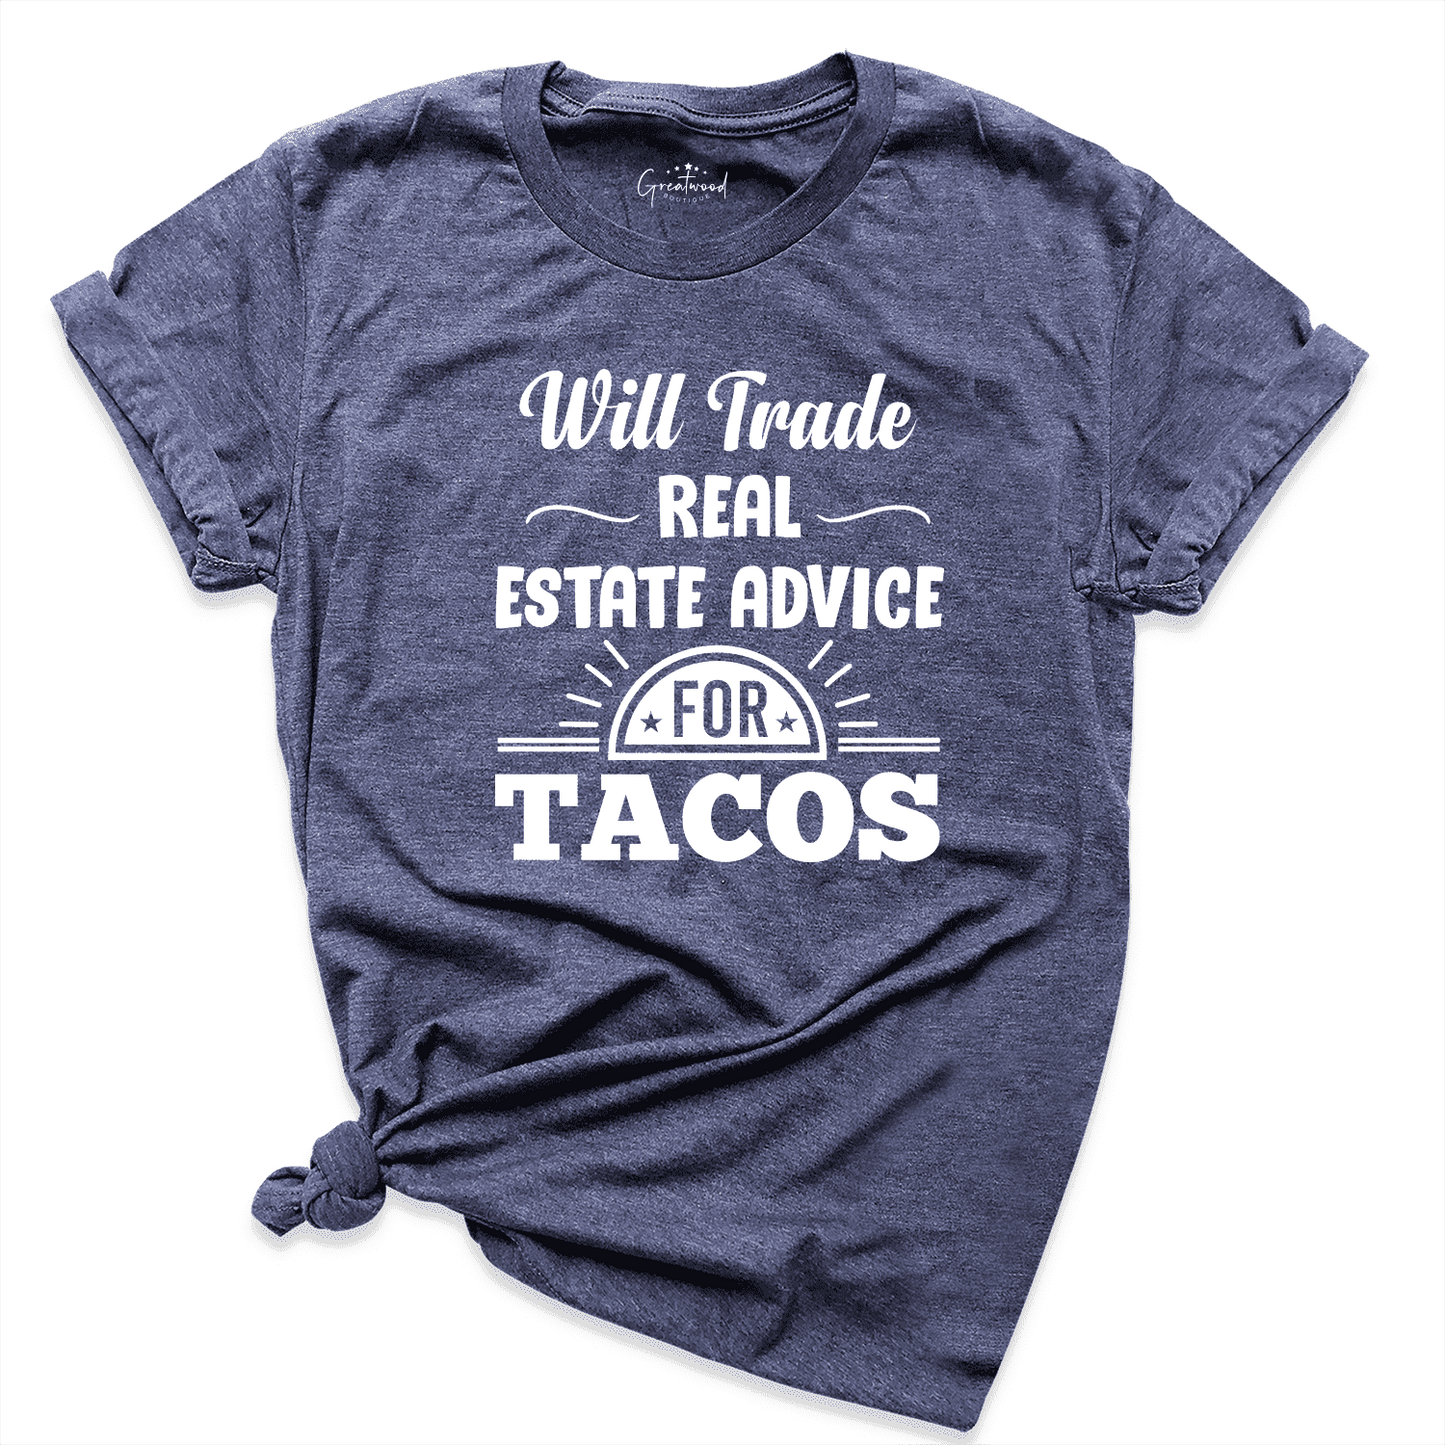 Will Trade Real Estate Advice for Tacos Shirt Navy - Greatwood Boutique  